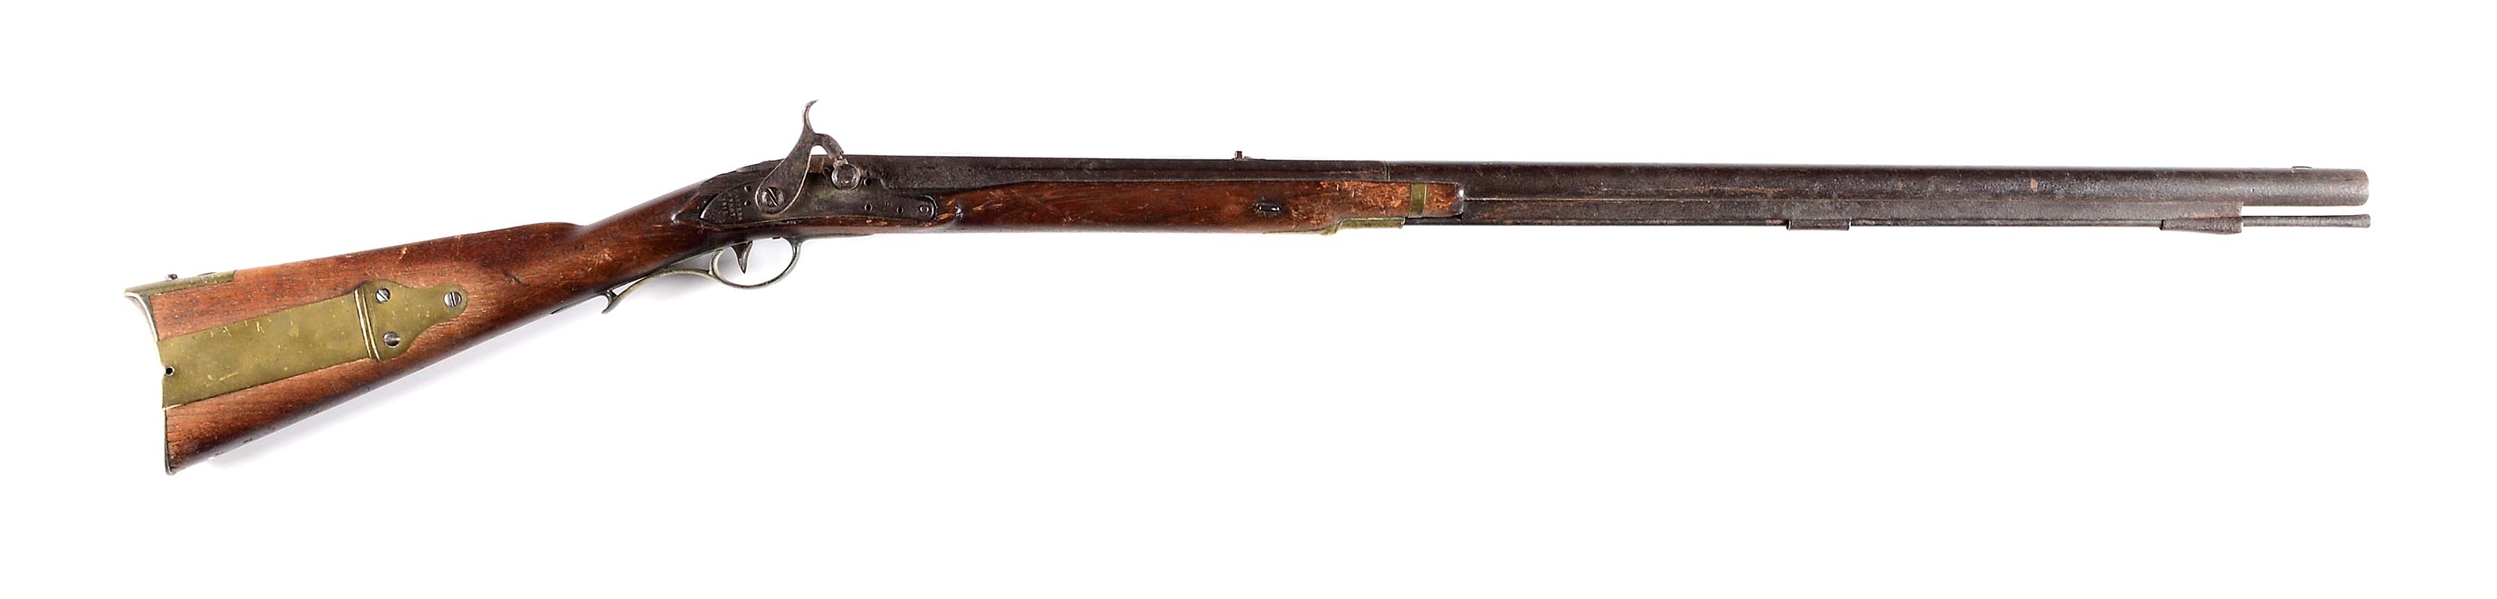 (A) HARPERS FERRY MODEL 1803/14 PERCUSSION RIFLE DATED 1819.